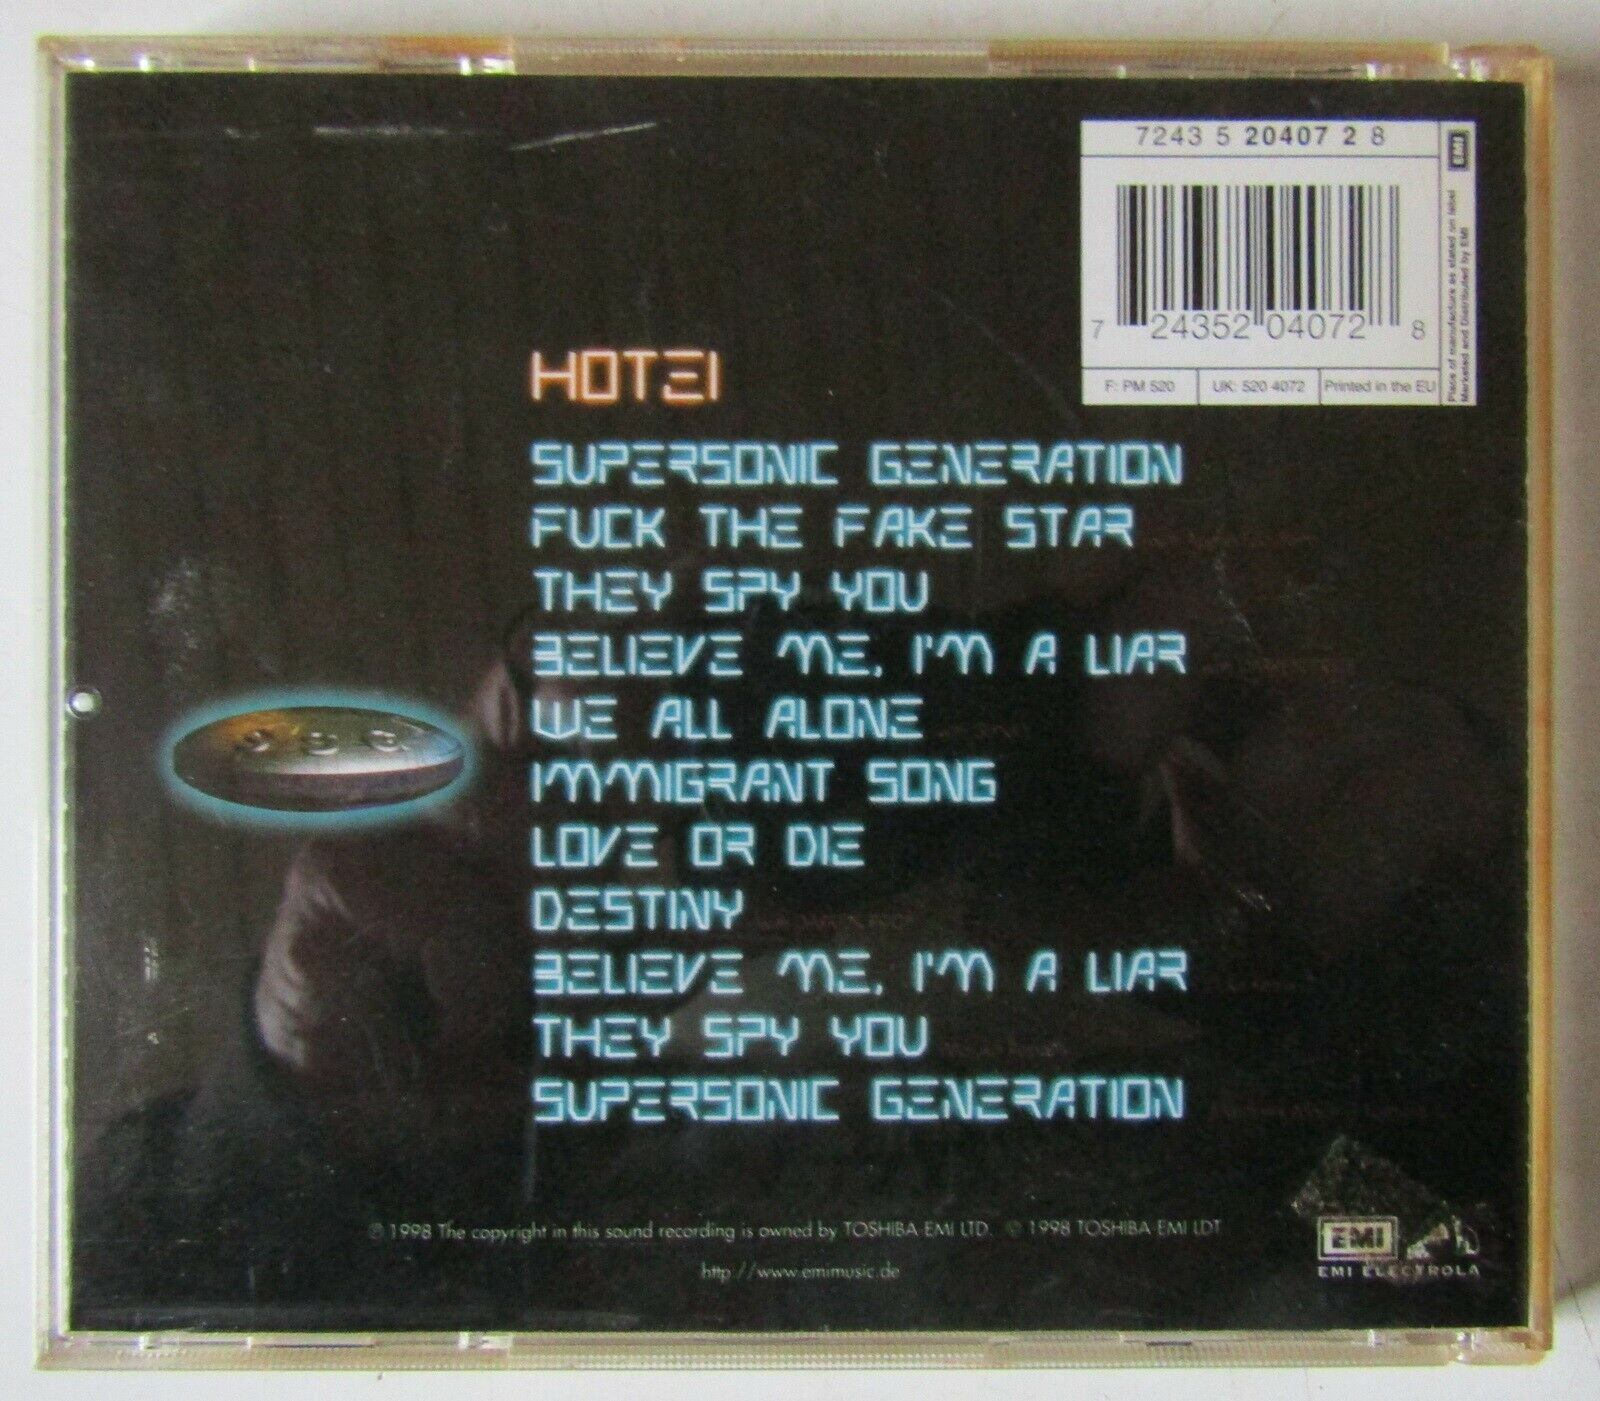 Hotei: Supersonic Generation, electronic